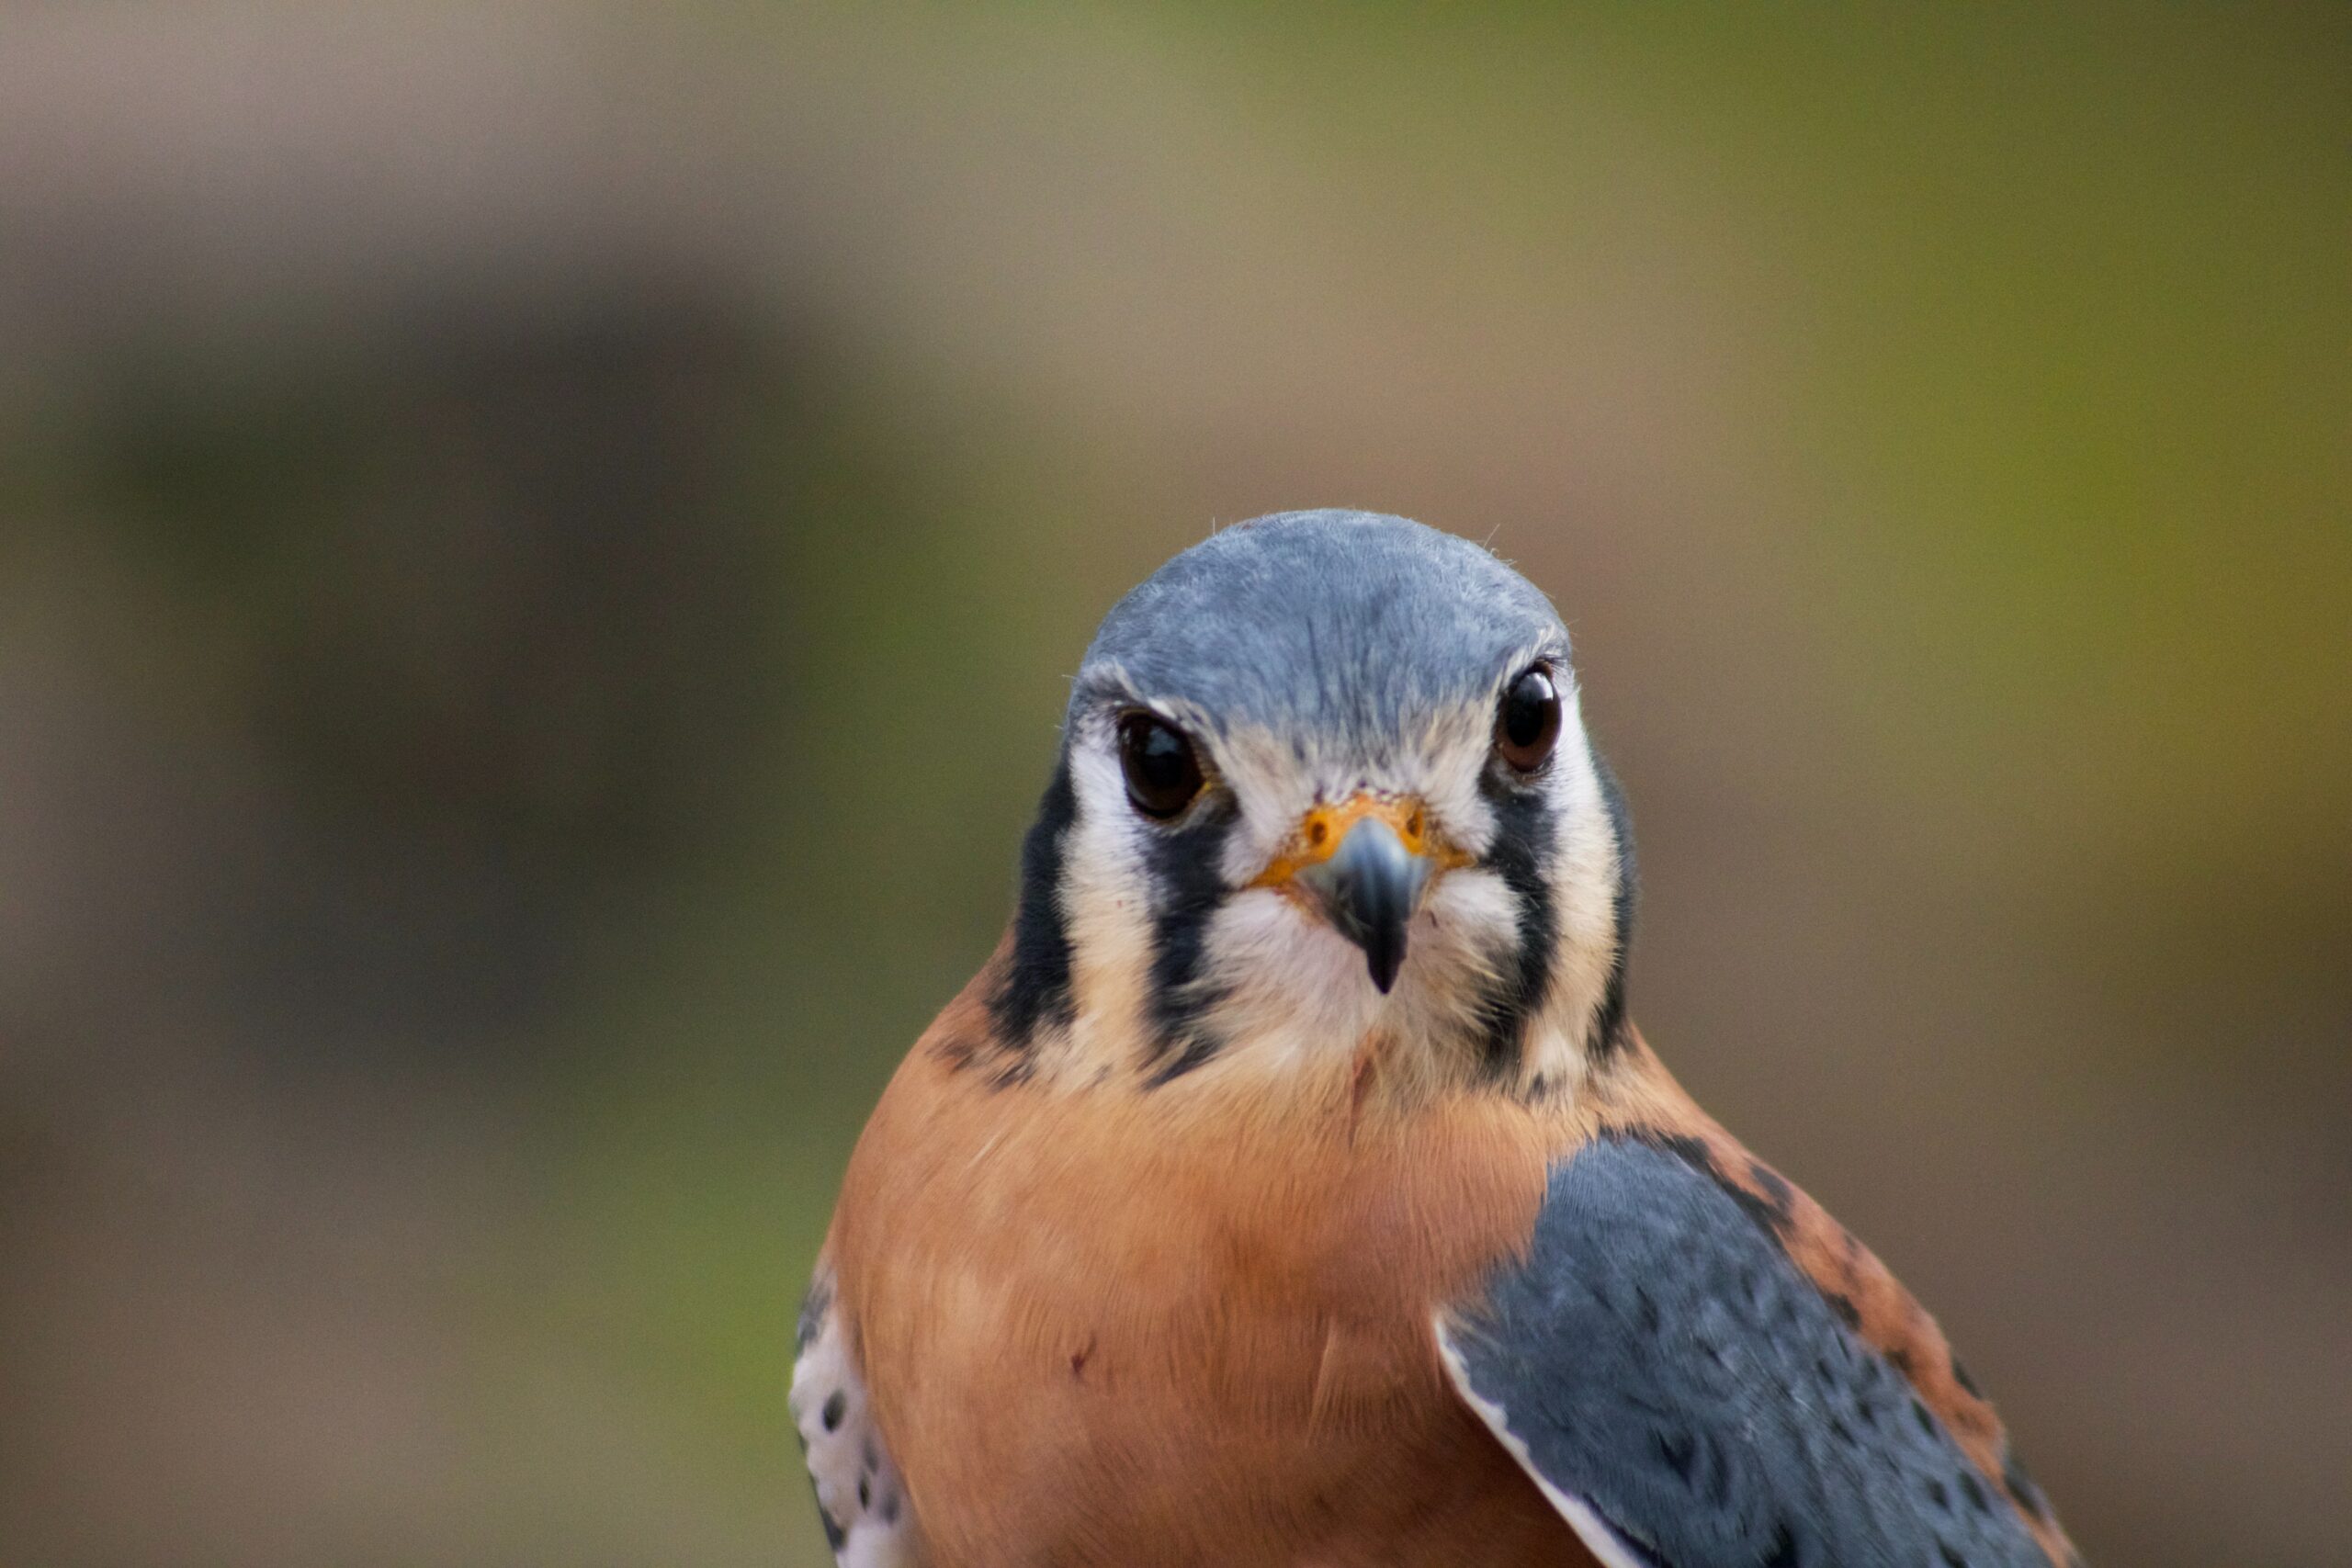 One of the most important laws protecting birds in the US just got gutted